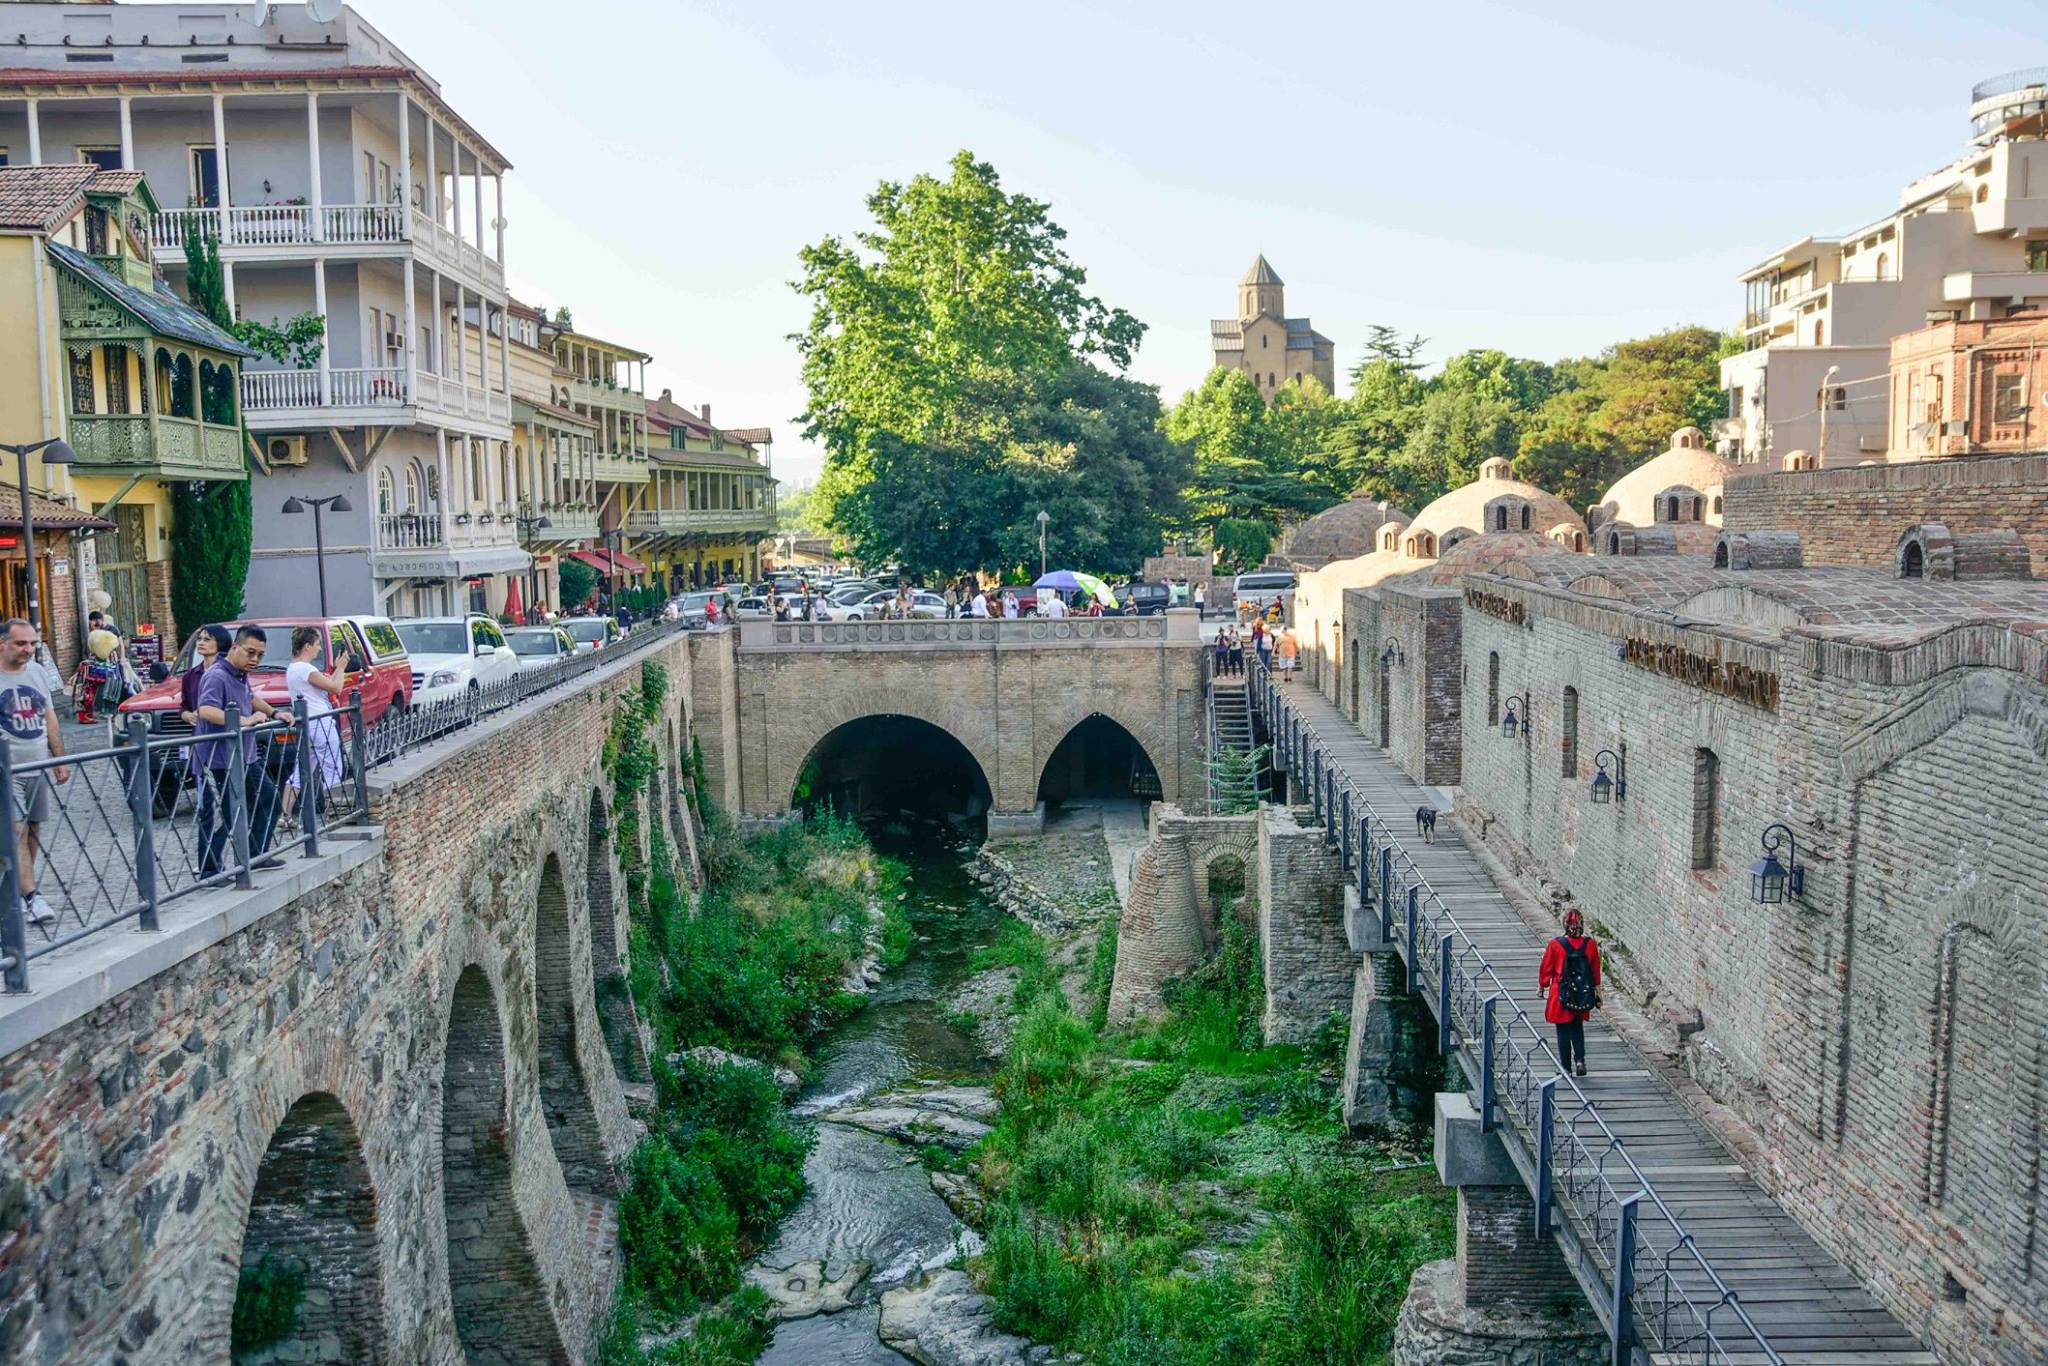 The capital city of Georgia, Tbilisi is a fascinating destination that's using its past to help shape its future. 